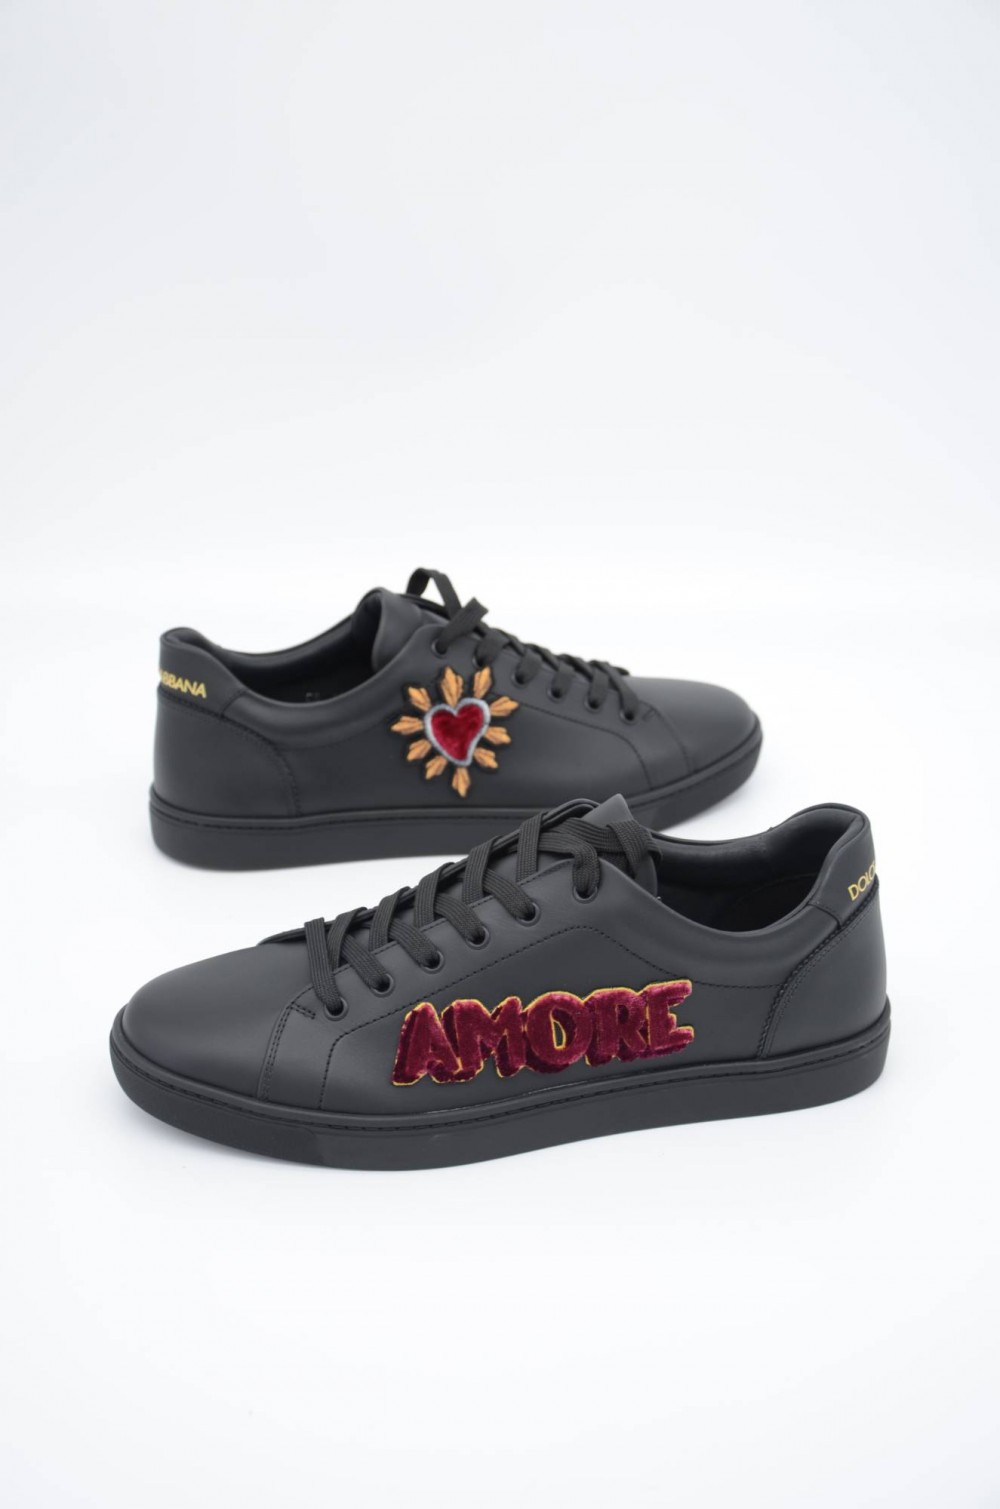 Buy > dolce and gabbana sneakers mens > in stock